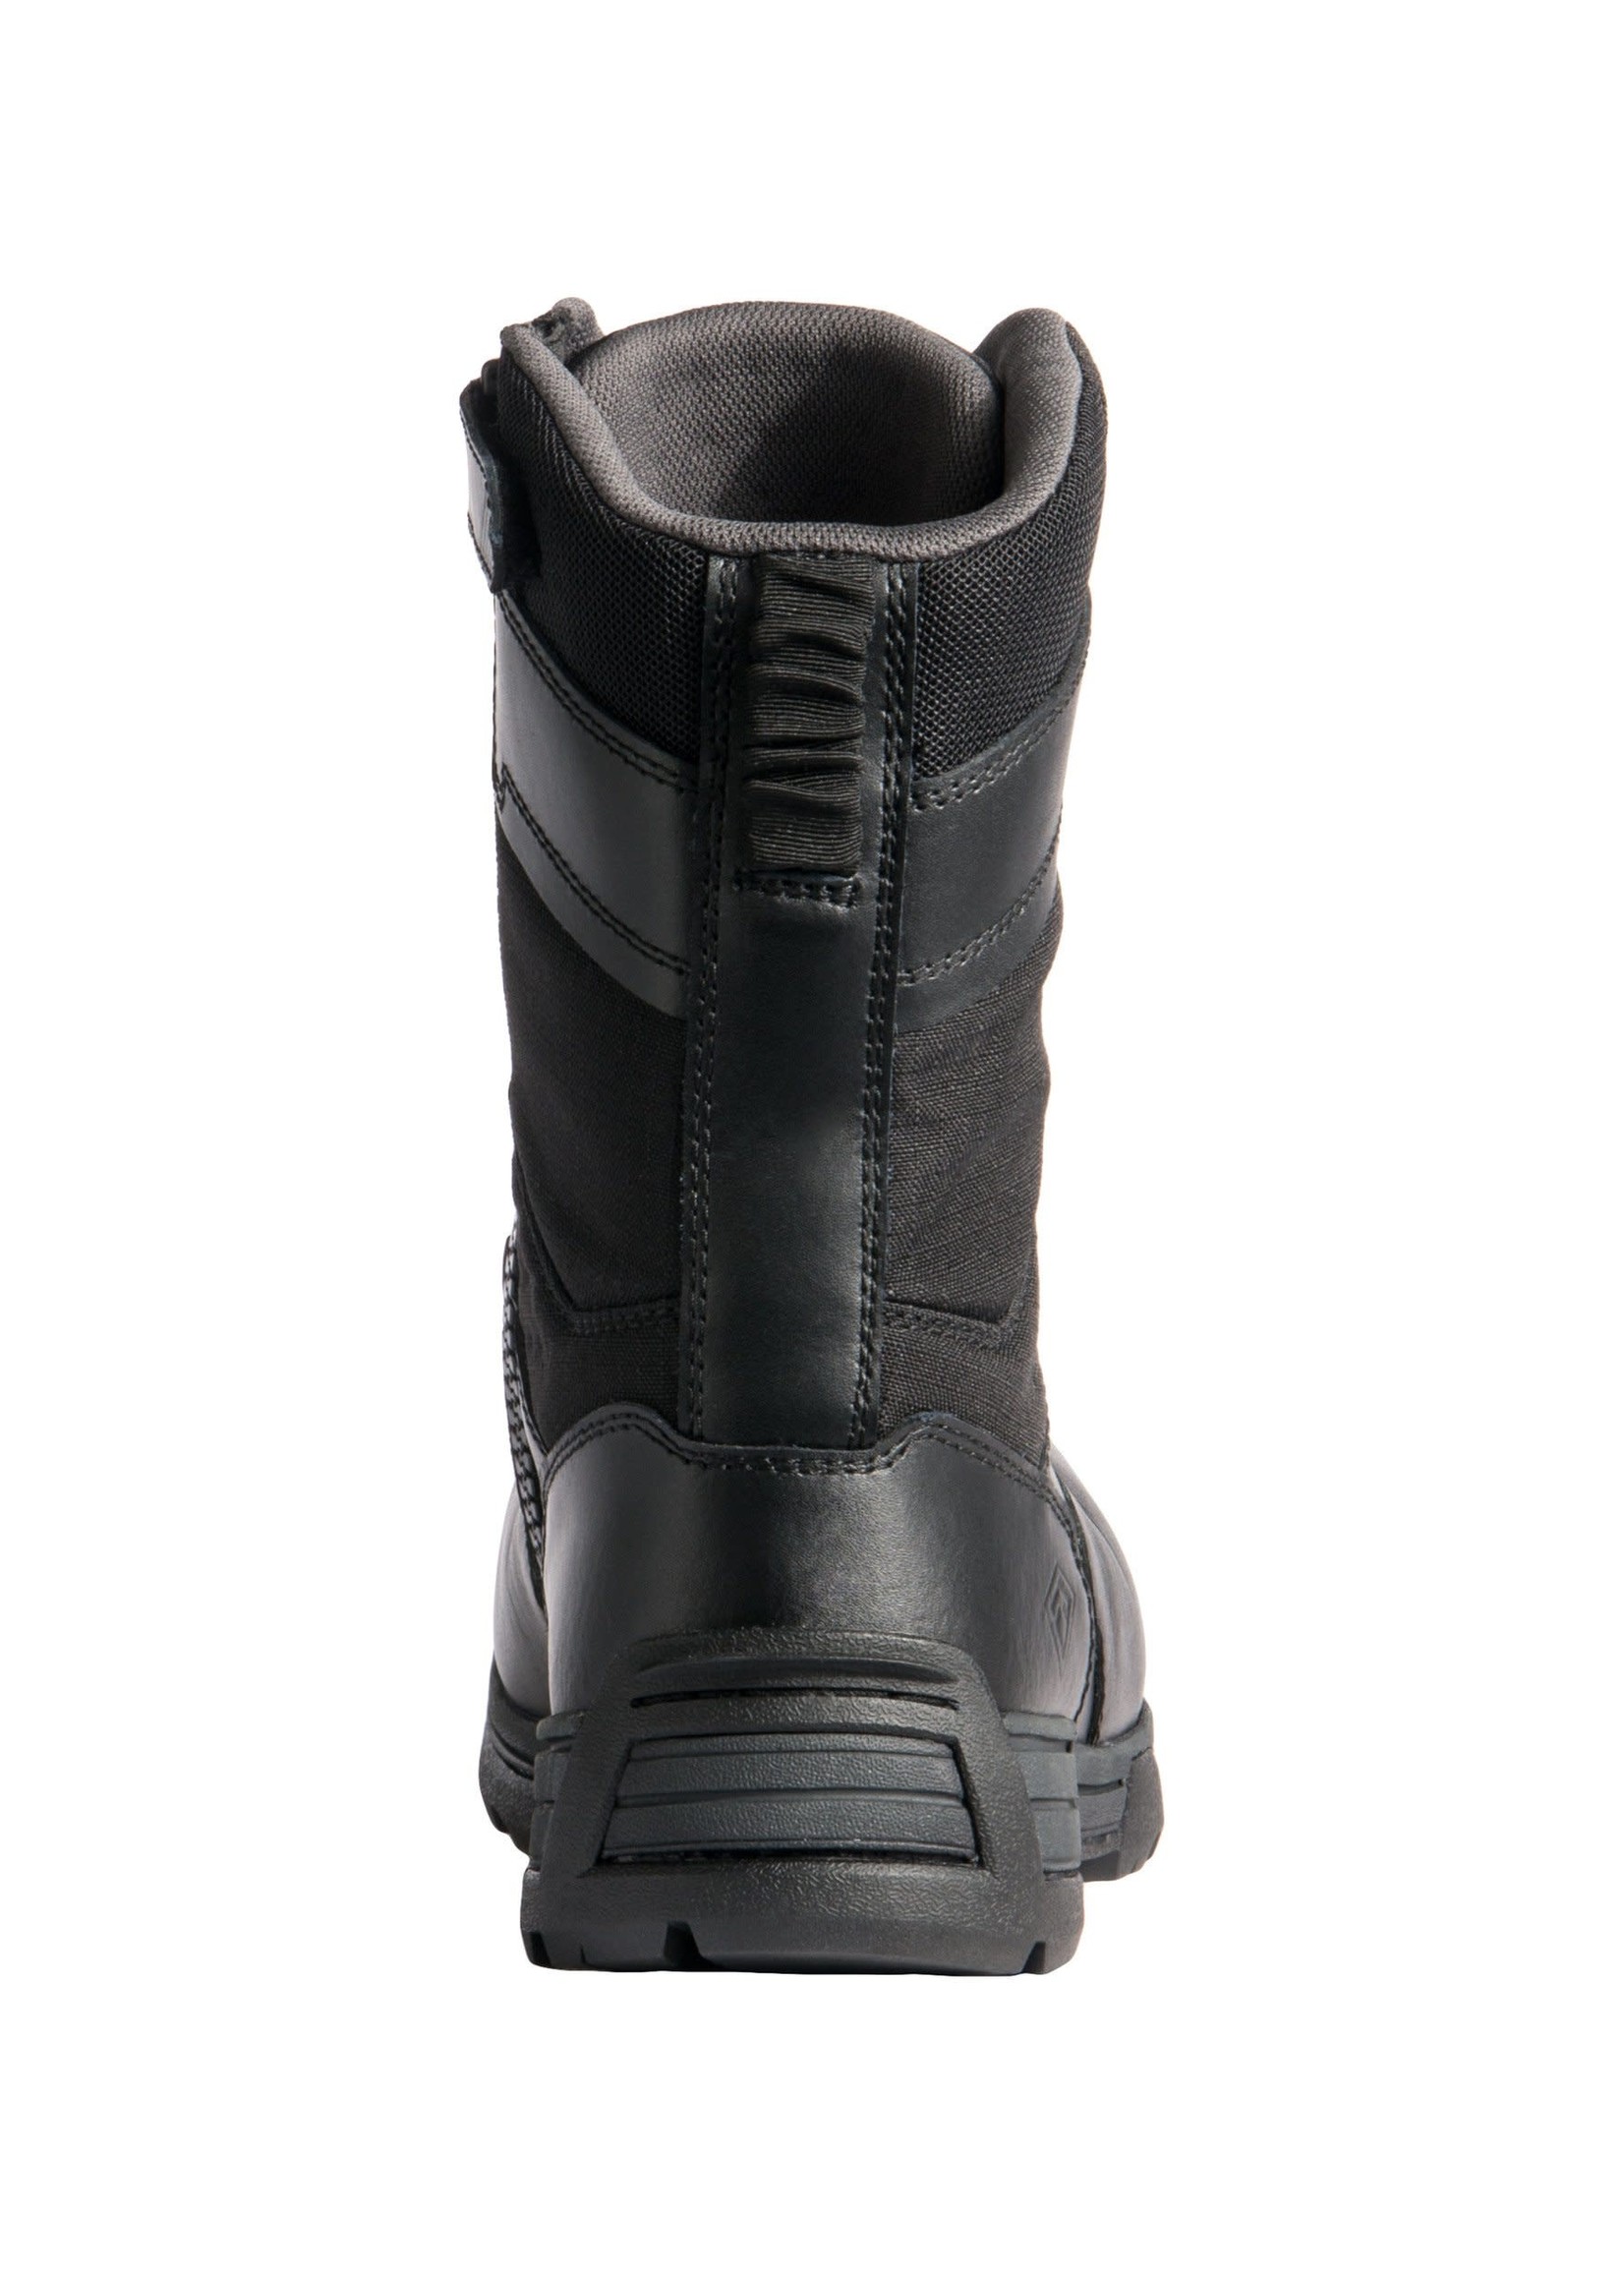 First Tactical First Tactical Men's 8" Safety Toe Side-Zip Duty Boot Black